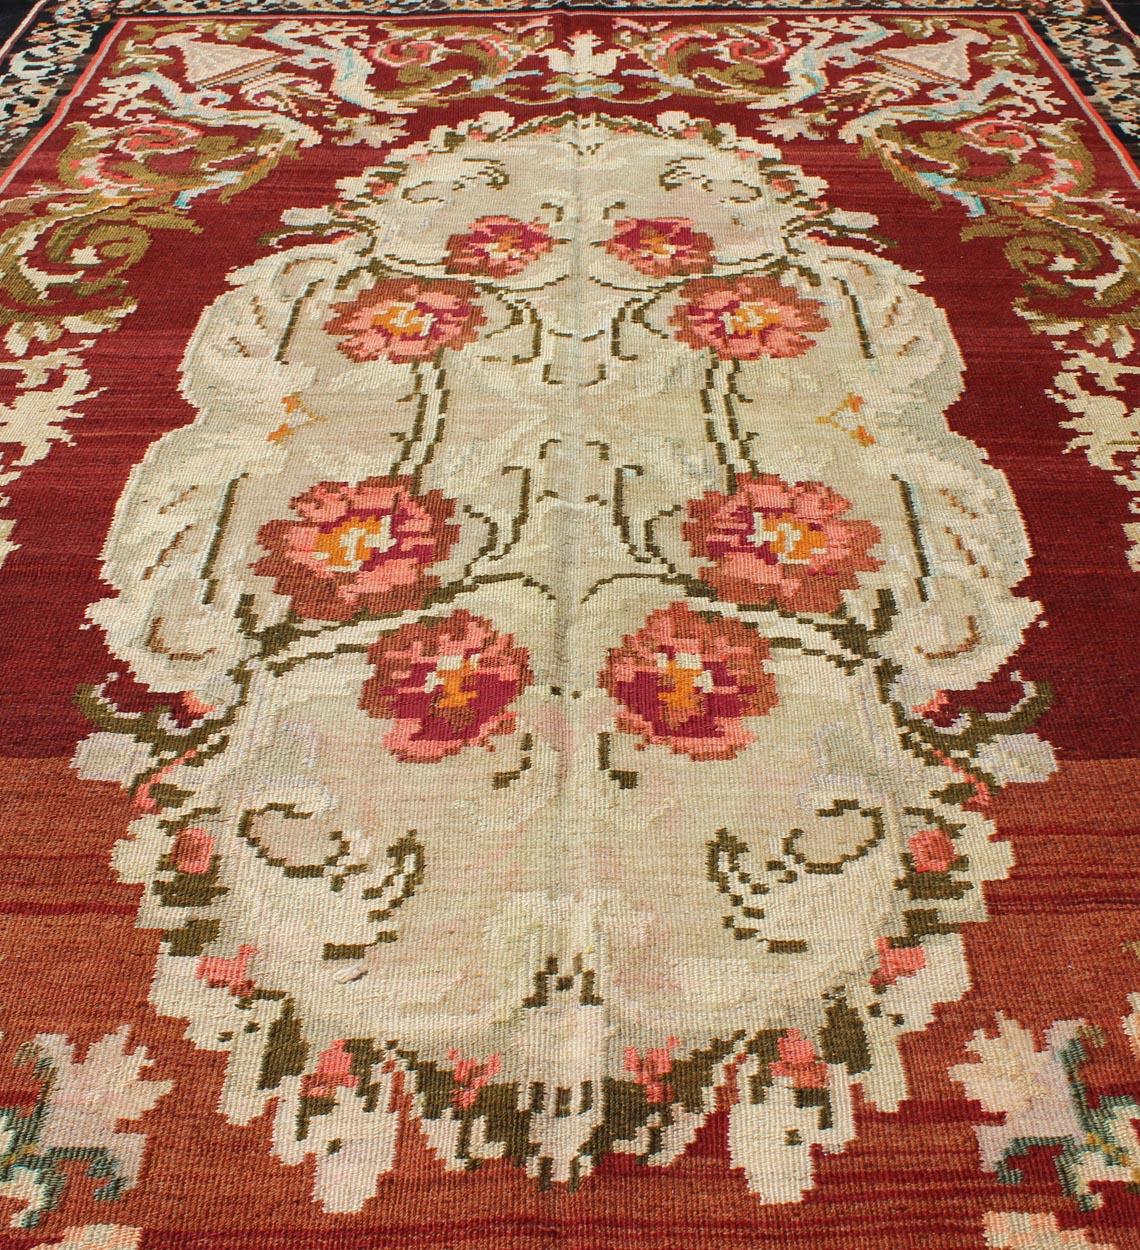 1940s vintage Bessarabian Kilim rug in deep and brilliant colors. Rug/ Kb-H--401-13, Country/ Eastern European flat weave
This beautiful Kilim was made in Eastern Europe in the Bessarabian style. Flat-weave vintage Bessarabian kilim rug with floral